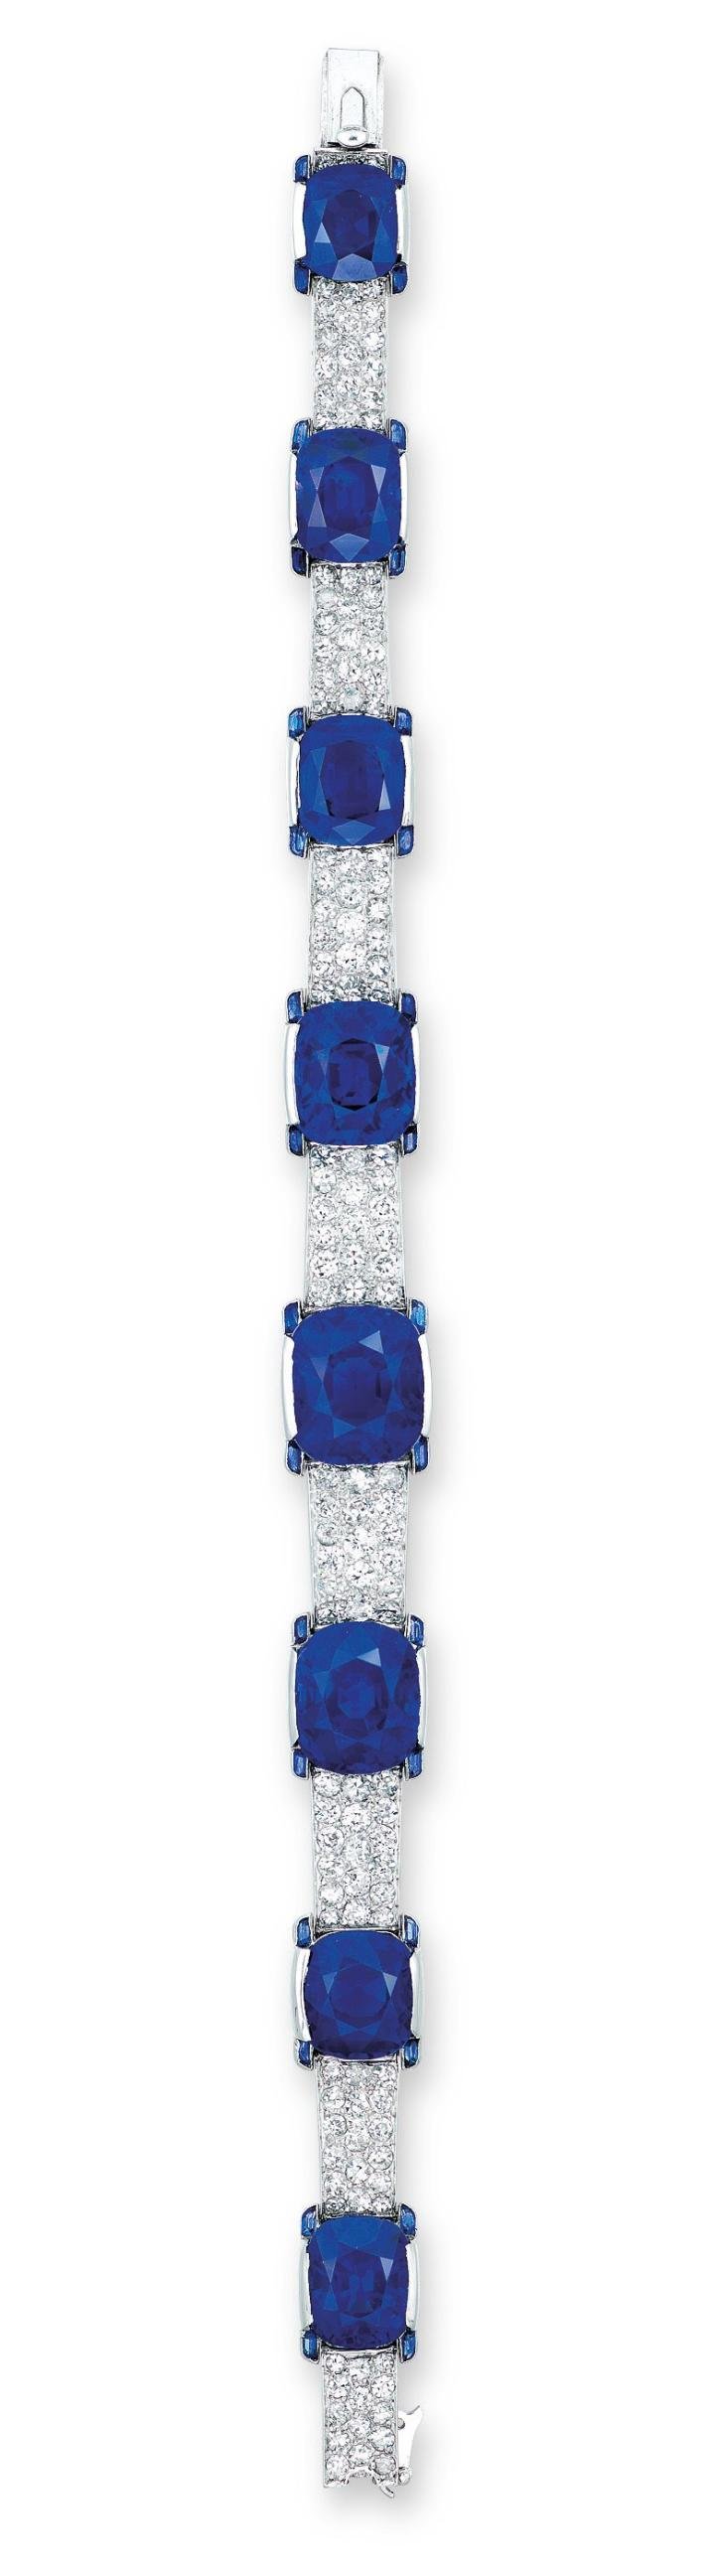  An exceptional Art Deco bracelet by Cartier sold by Christie's Hong Kong in 2016 for HKD 56,120,000 (USD 7,256,316) set with eight graduated cushion-shaped sapphires (10.53 to 3.38 car- ats) and four-stone diamond gallery, 1923, set in platinum.